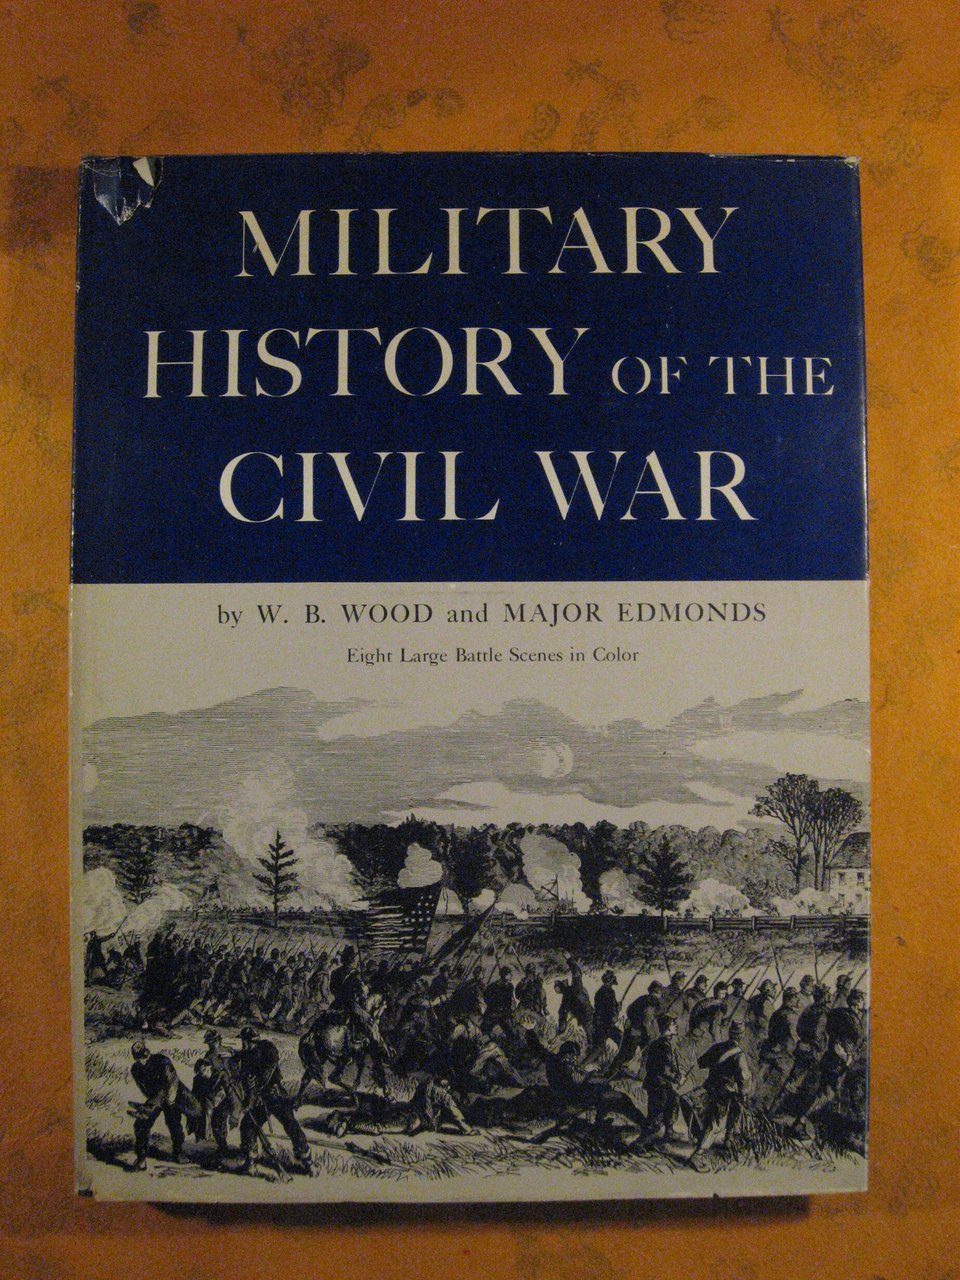 Military History of the Civil War 1861 - 1865